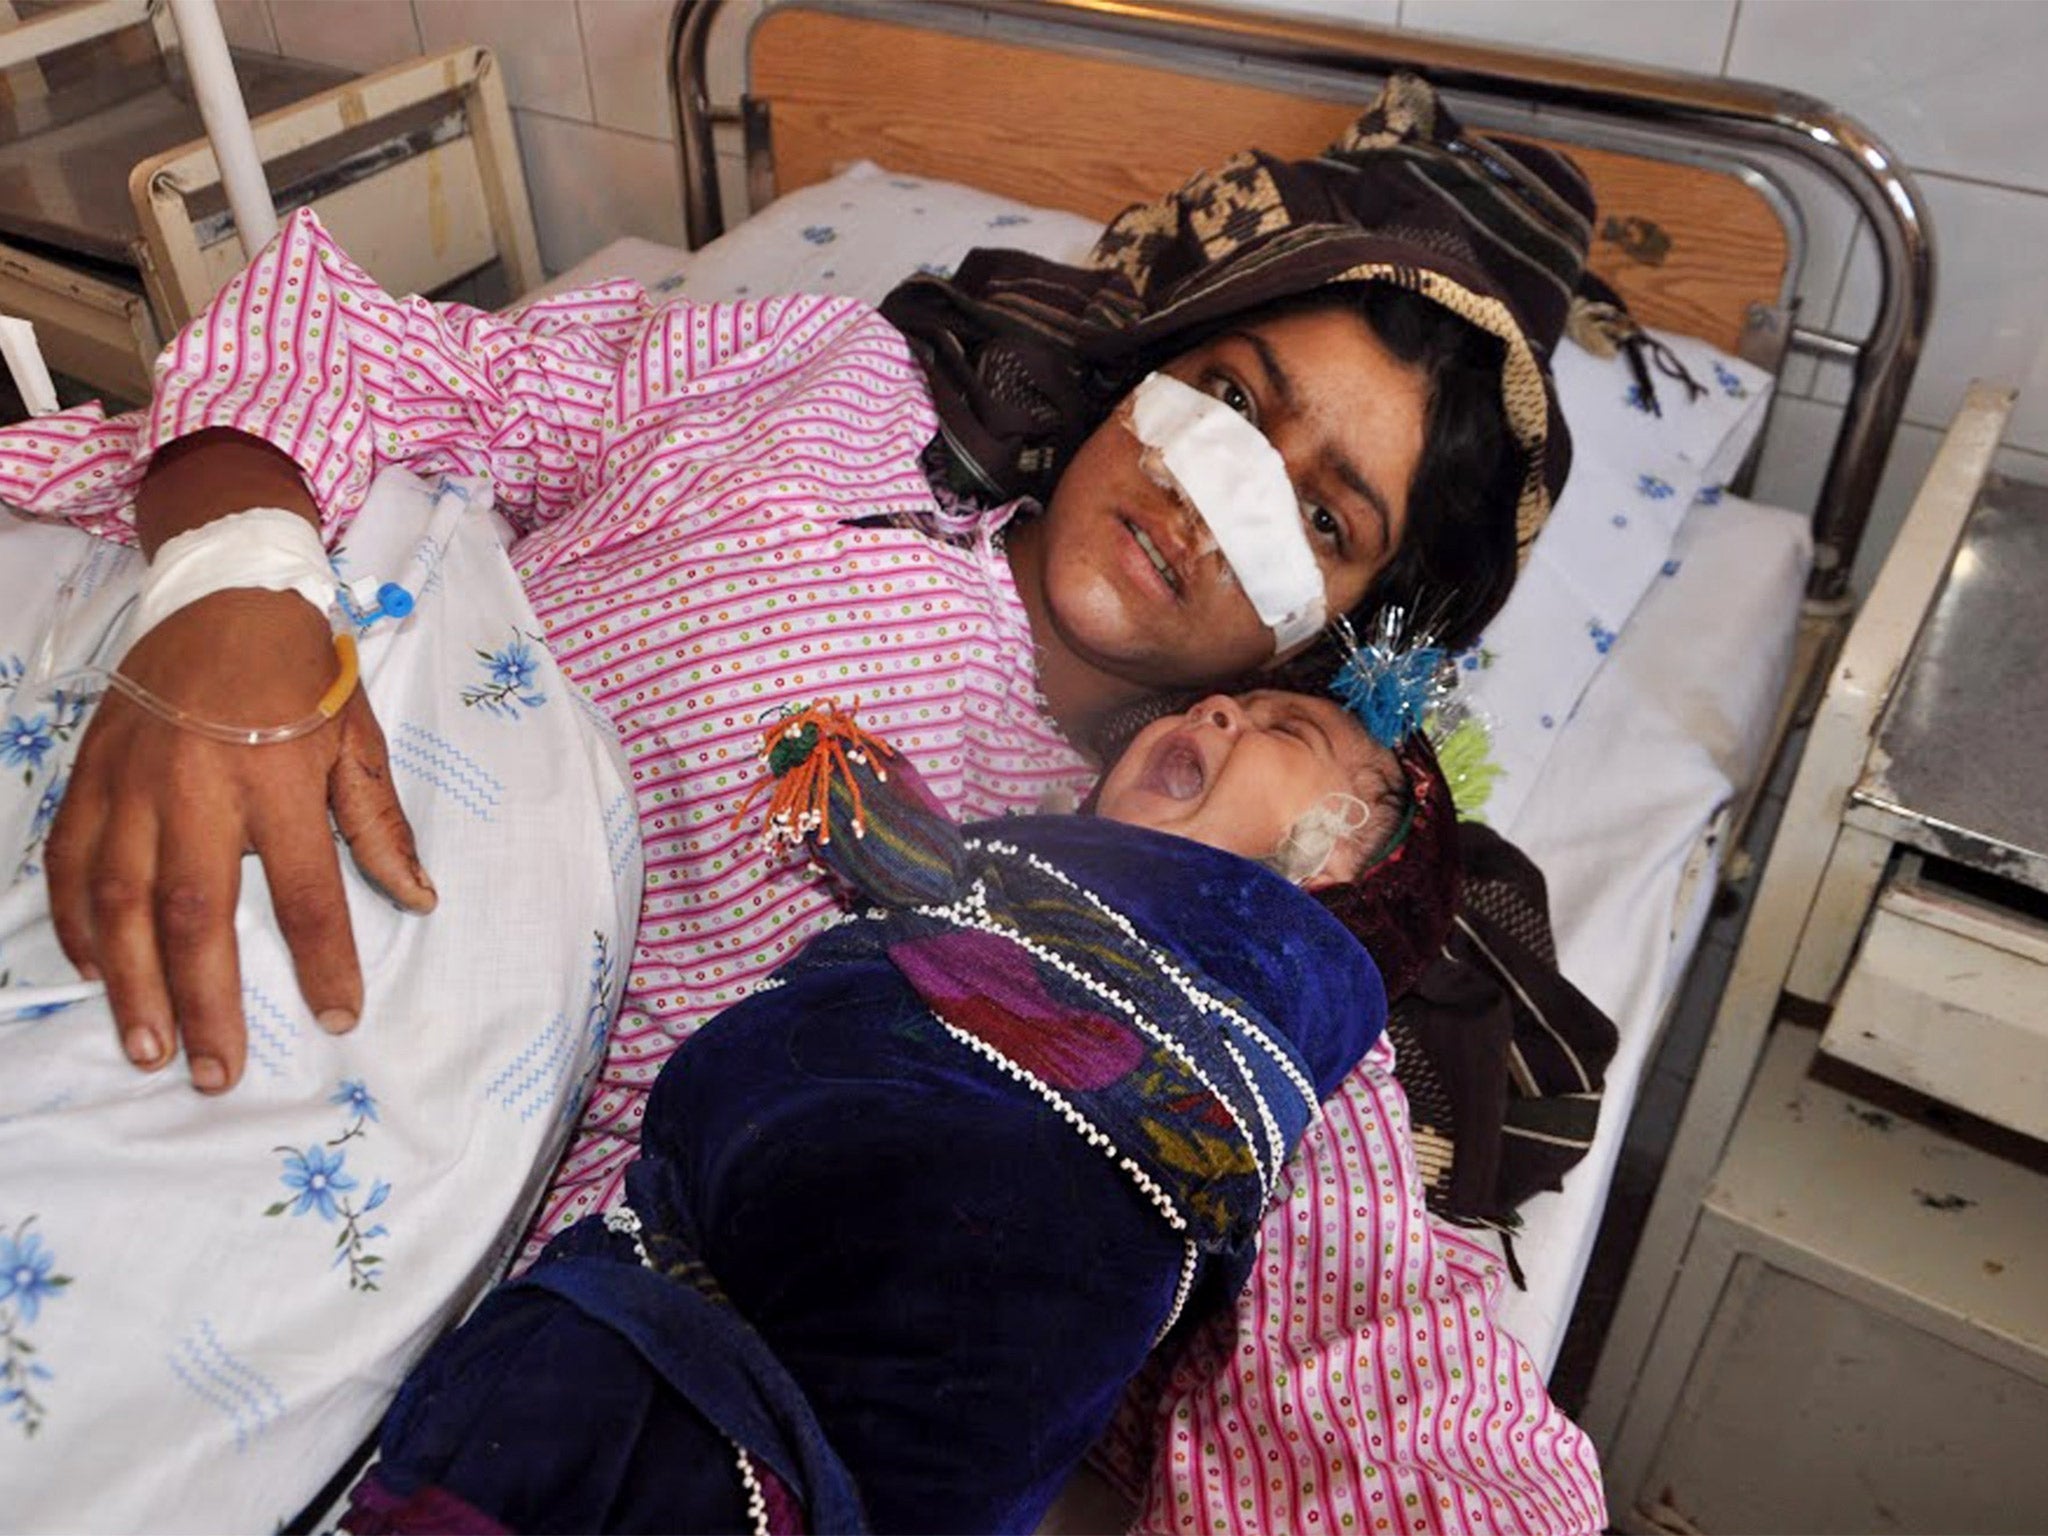 Reza Gul, whose nose was sliced off by her husband, lies on a bed with her baby as she receives treatment at a hospital in the northern province of Faryab